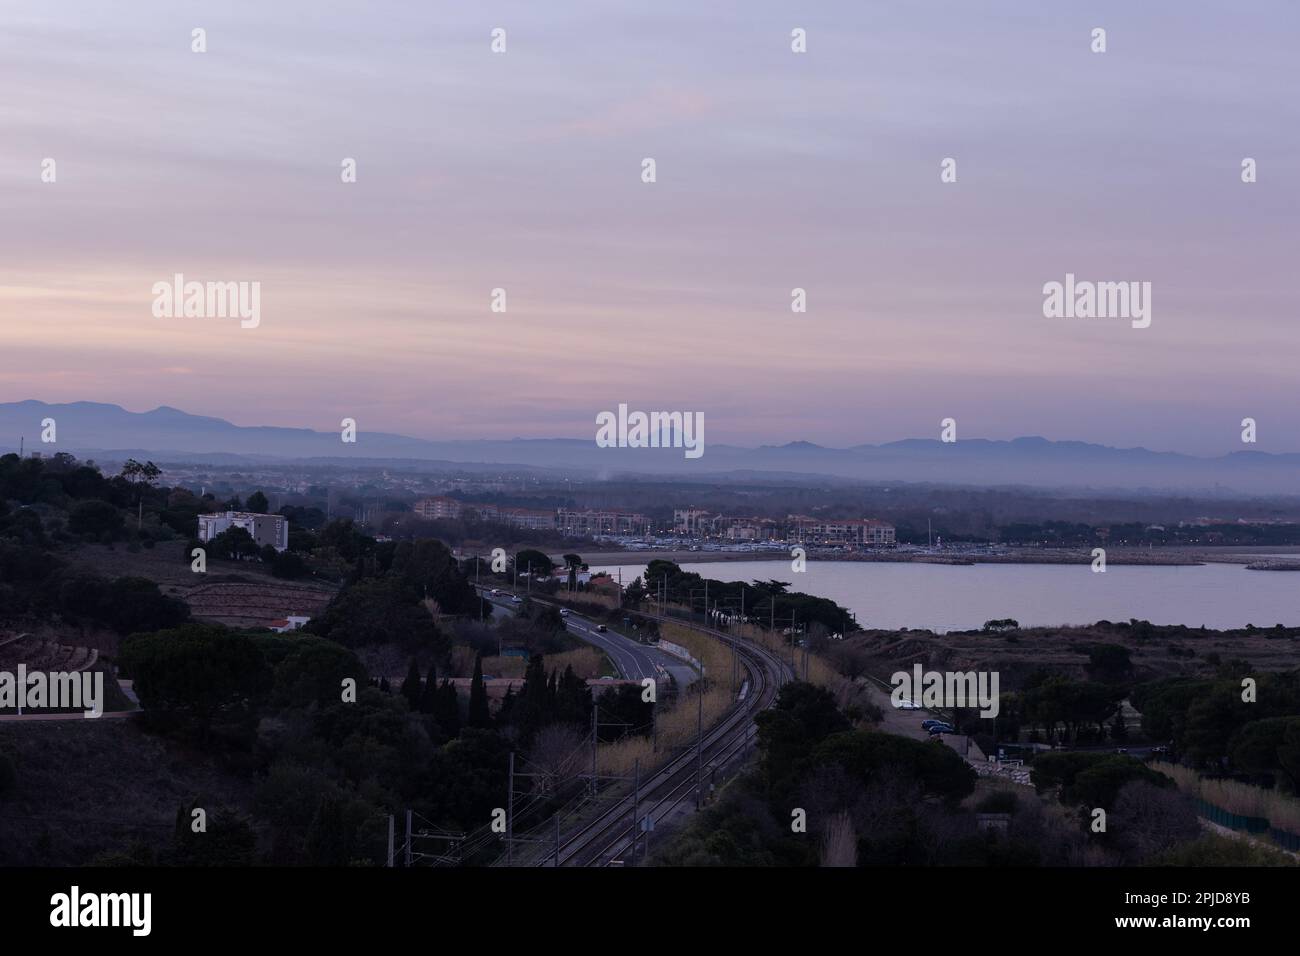 Aerial picture of Collioure after the sunset in pink and blue undertones. City view with skyline and Mediterranean sea. Stock Photo